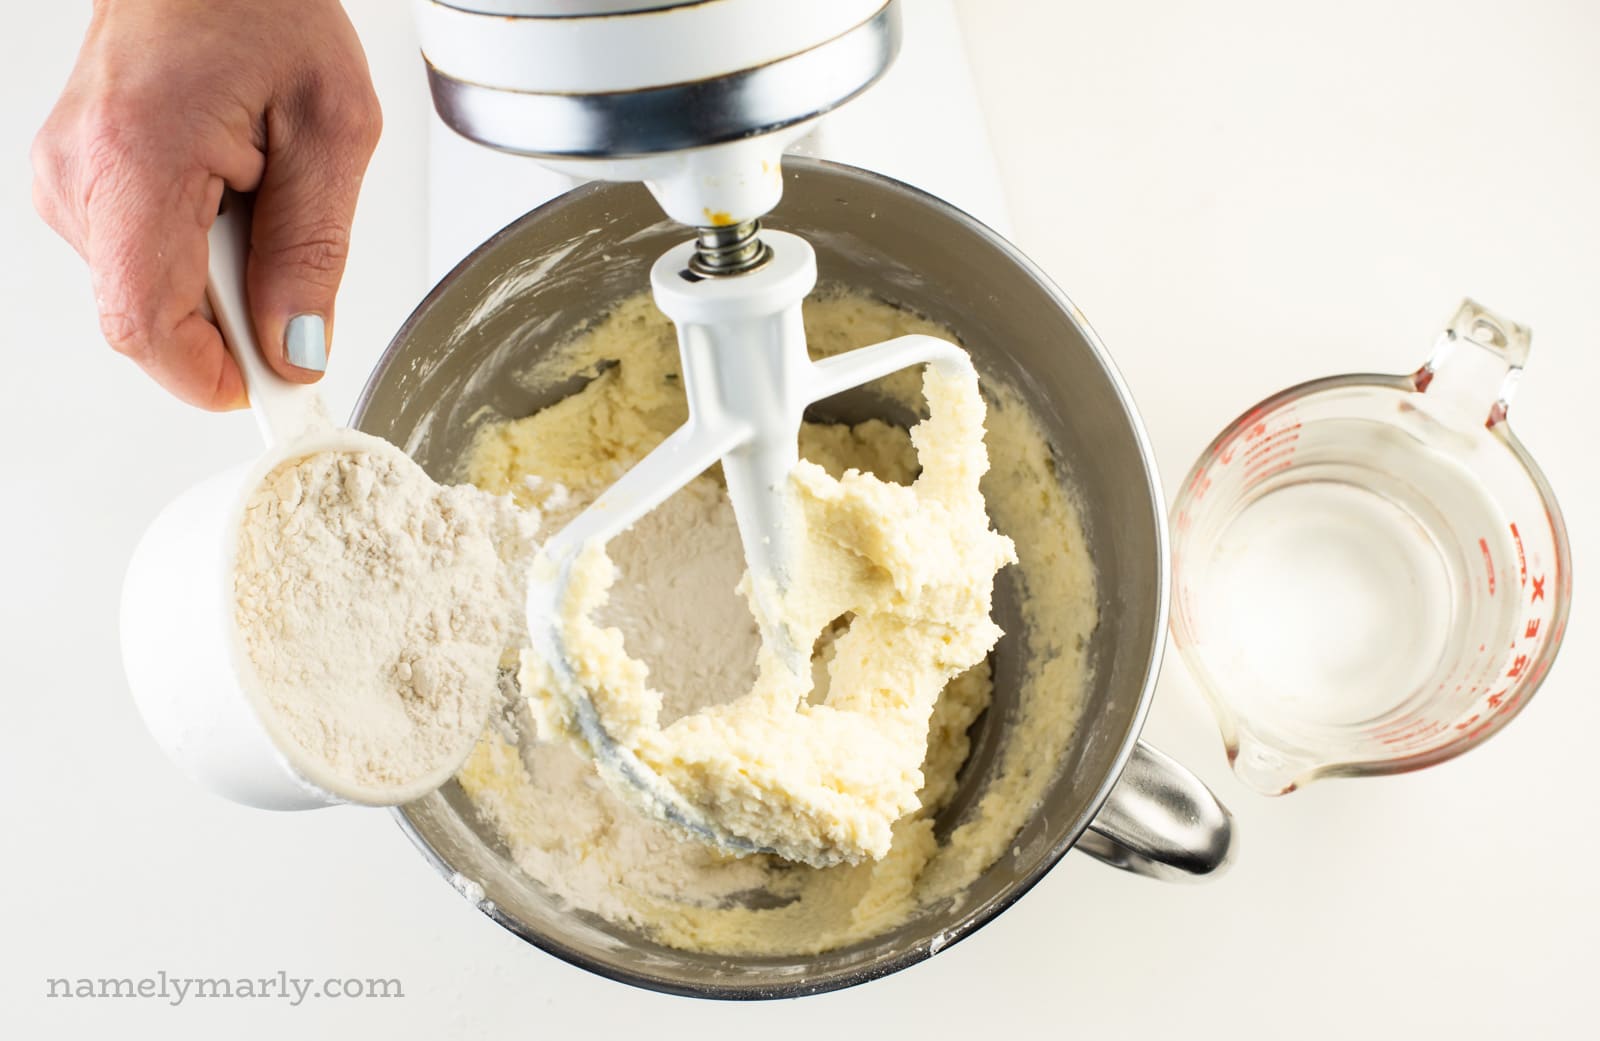 A hand pours flour into a mixing bowl. A pyrex measuring dish of water sits next to it.